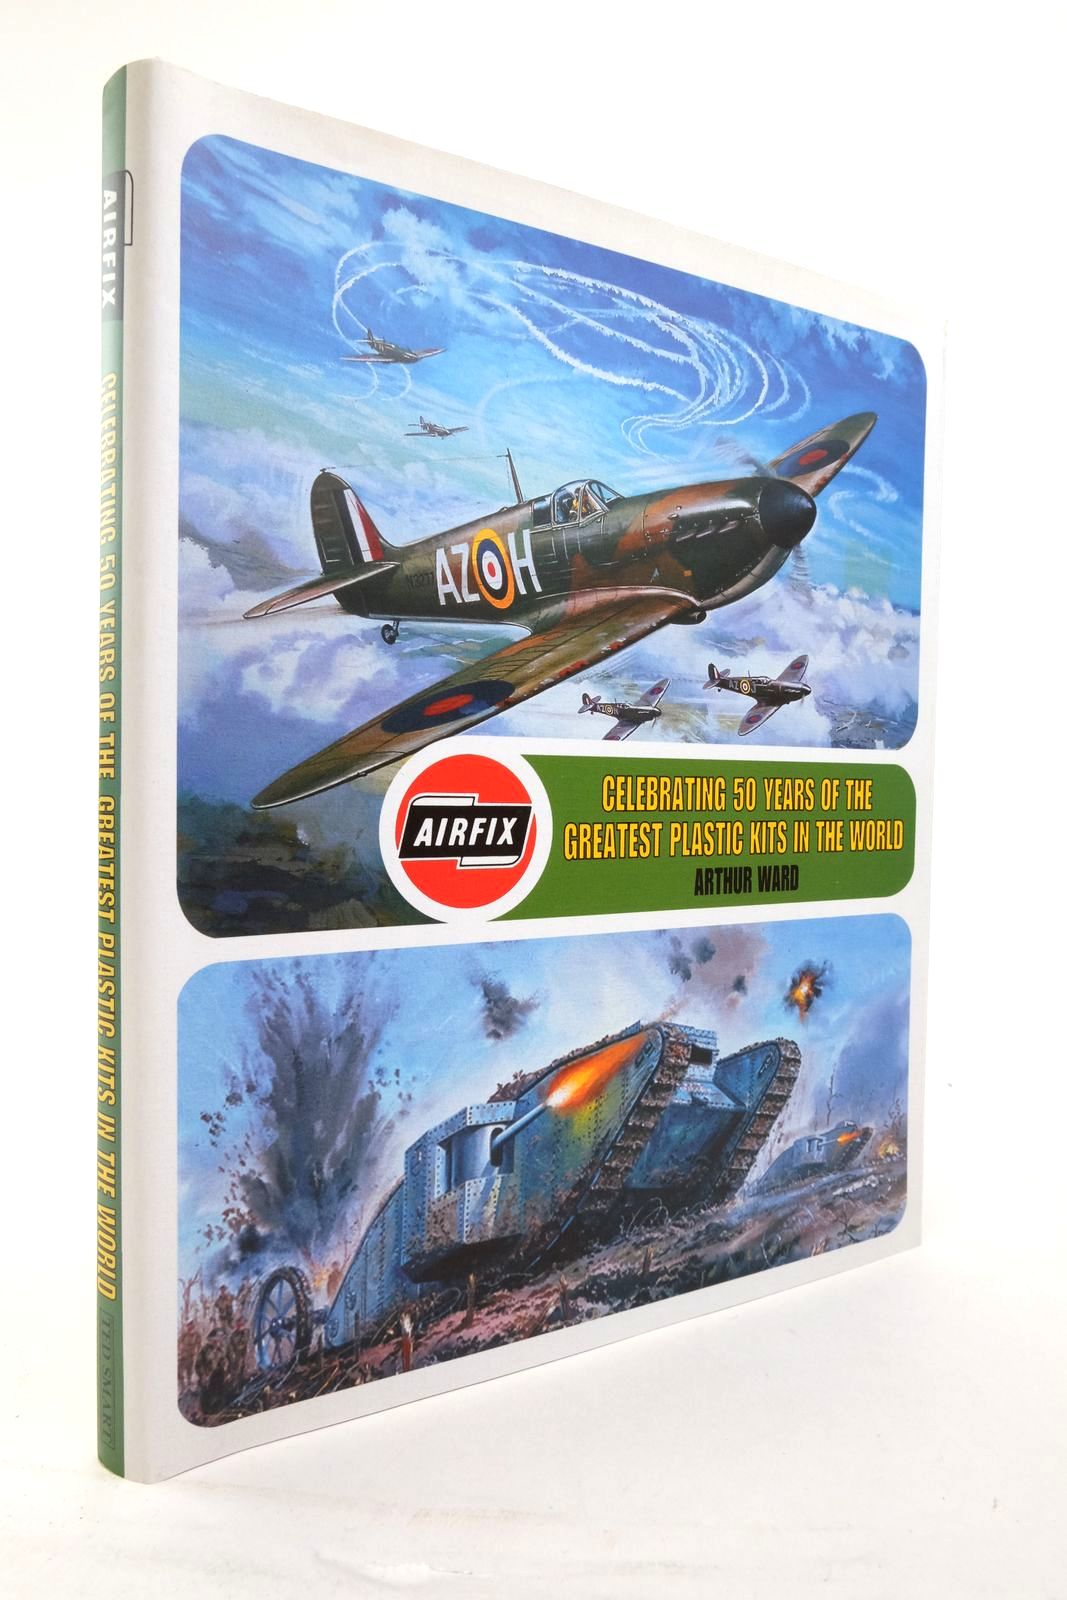 Photo of AIRFIX: CELEBRATING 50 YEARS OF THE WORLD'S GREATEST PLASTIC KITS- Stock Number: 2137702